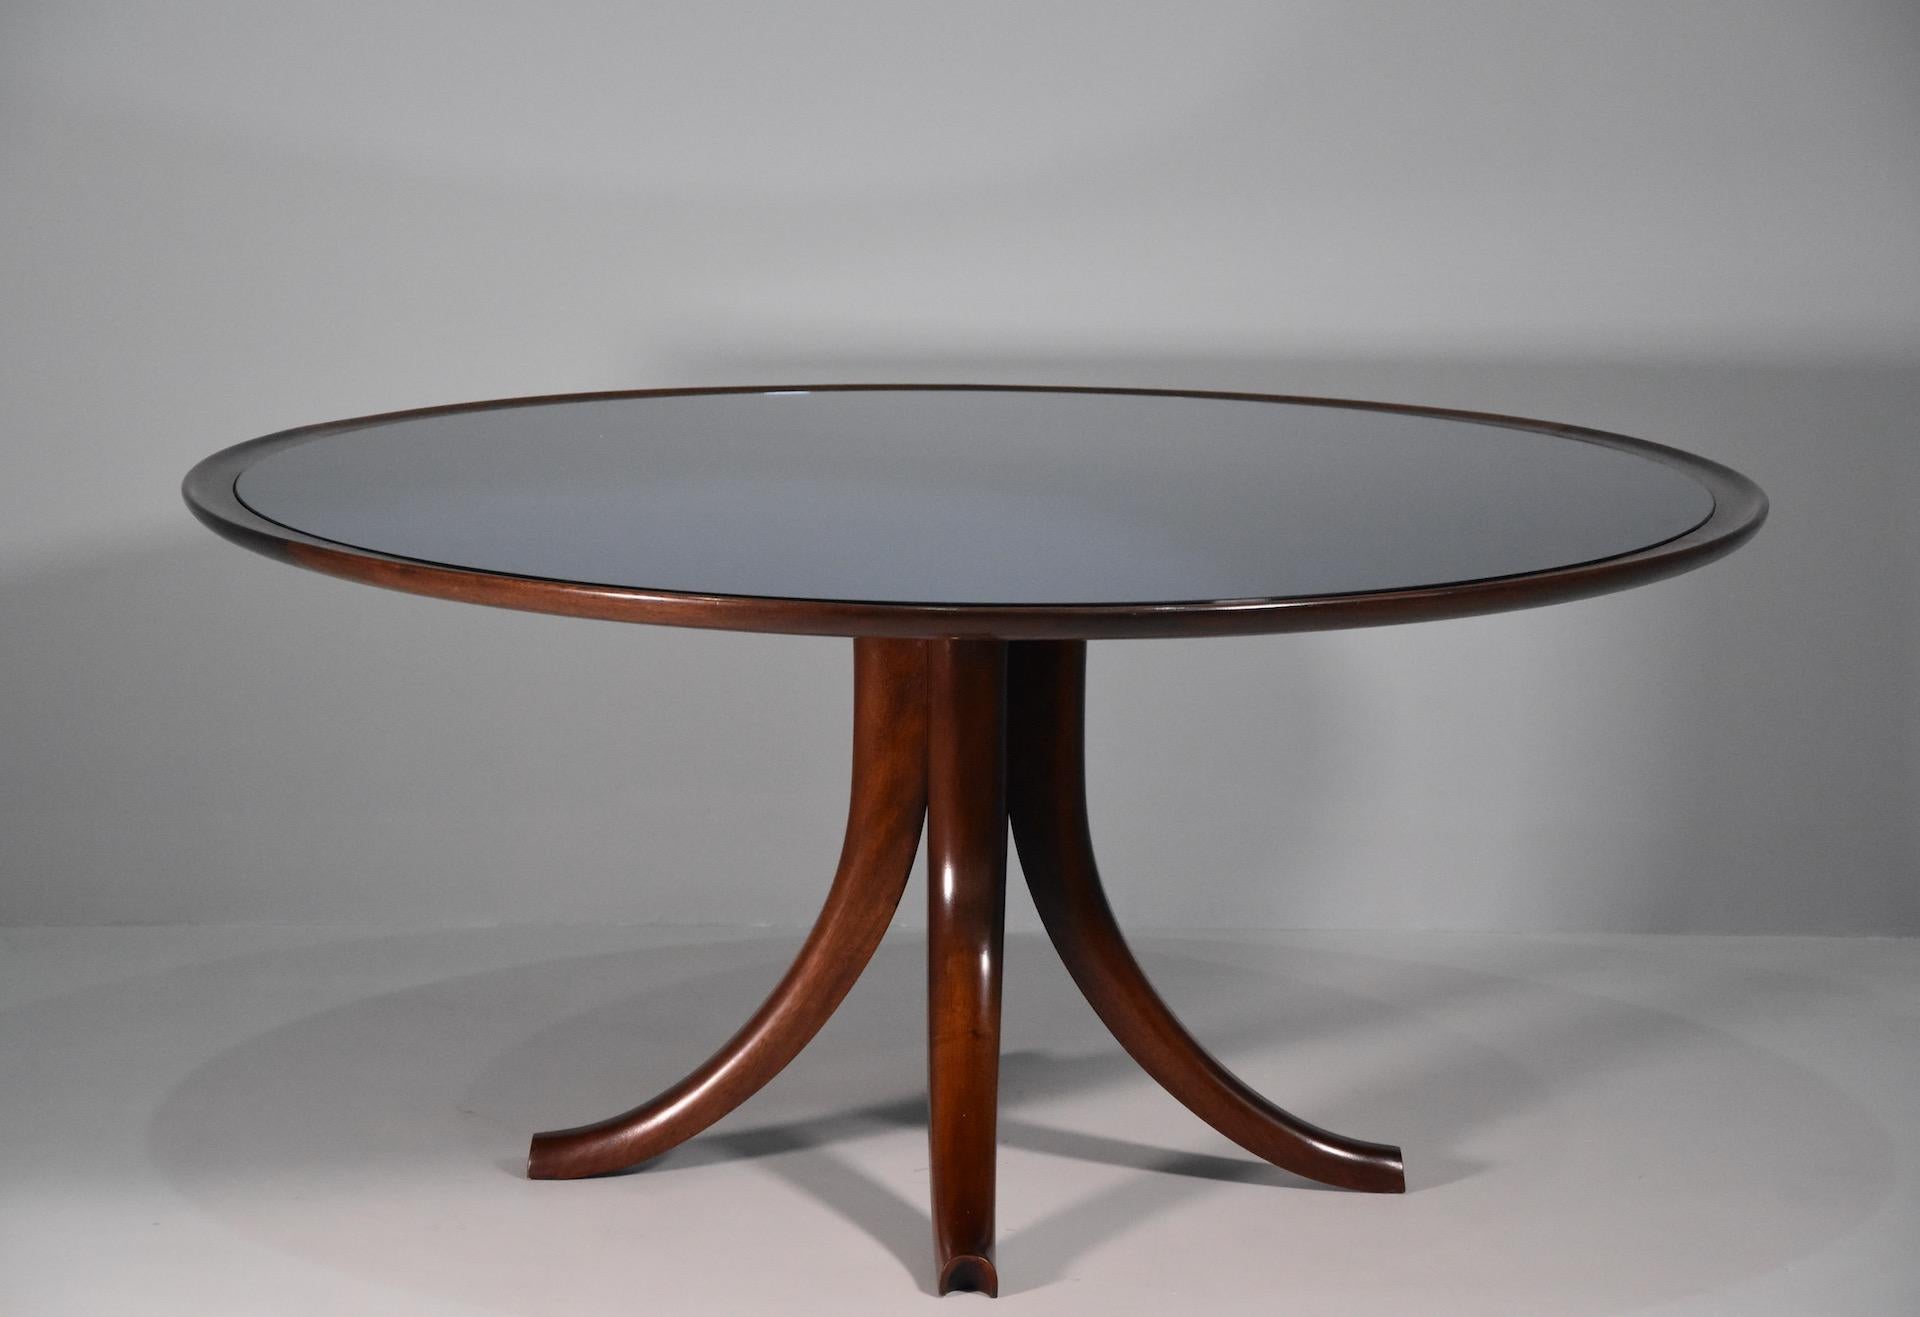 Italian Rare Variant of Big Table Pietro Chiesa for Fontana Arte 1940 Whit Blue Mirror For Sale